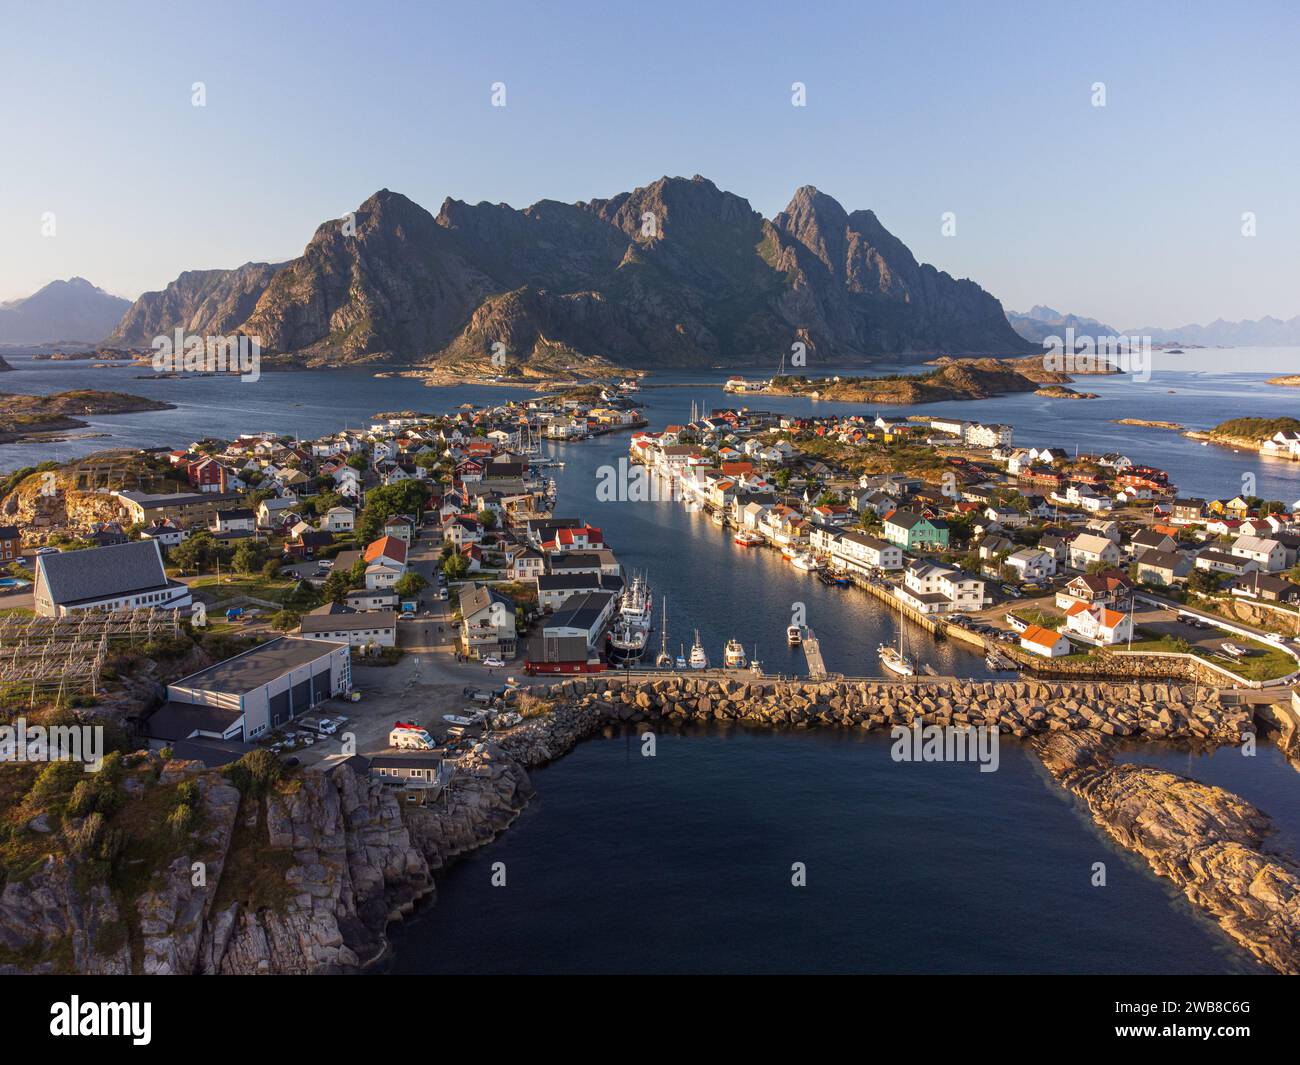 The small fishing town of Henningsvaer, Lofoten, Norway at sunset, from a drone point of view. Clear blue sky and crisp colors. Stock Photo